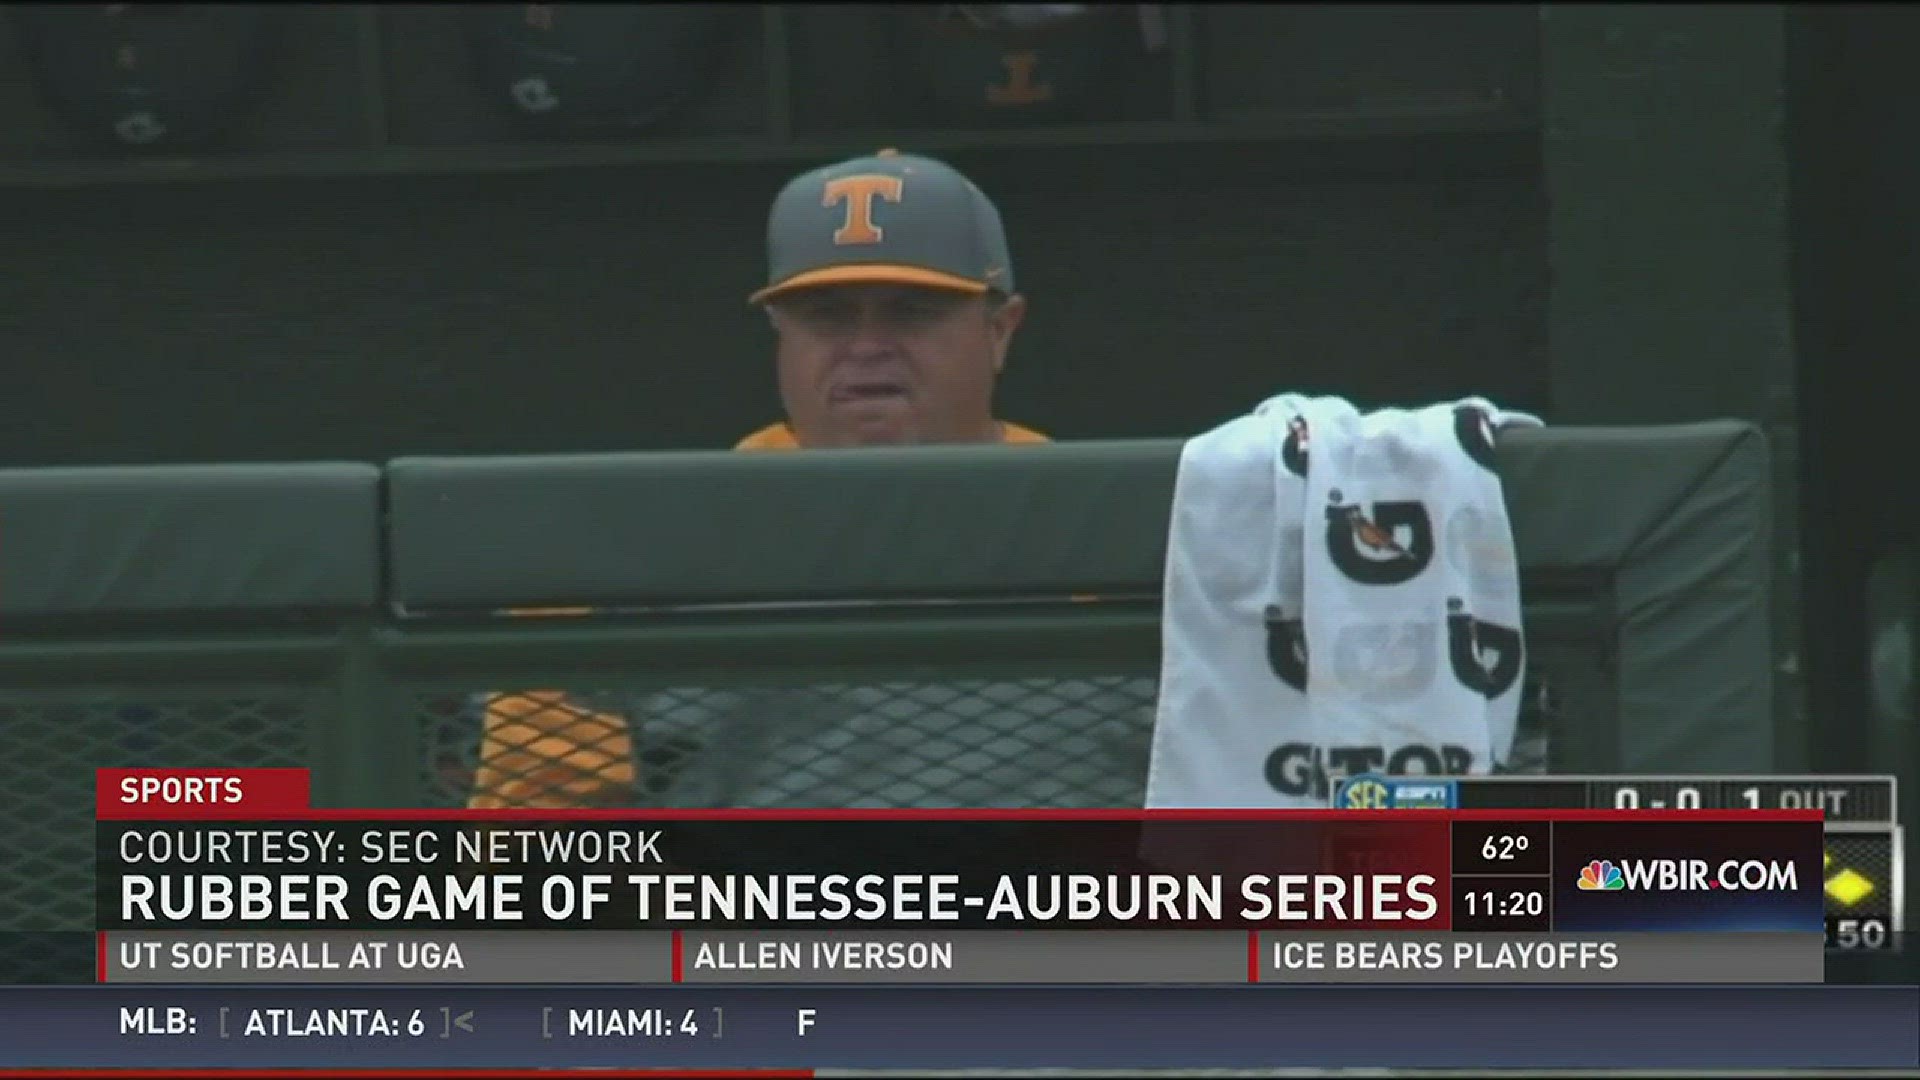 Tennessee baseball dropped the series at Auburn, losing 7-6 in the rubber game.